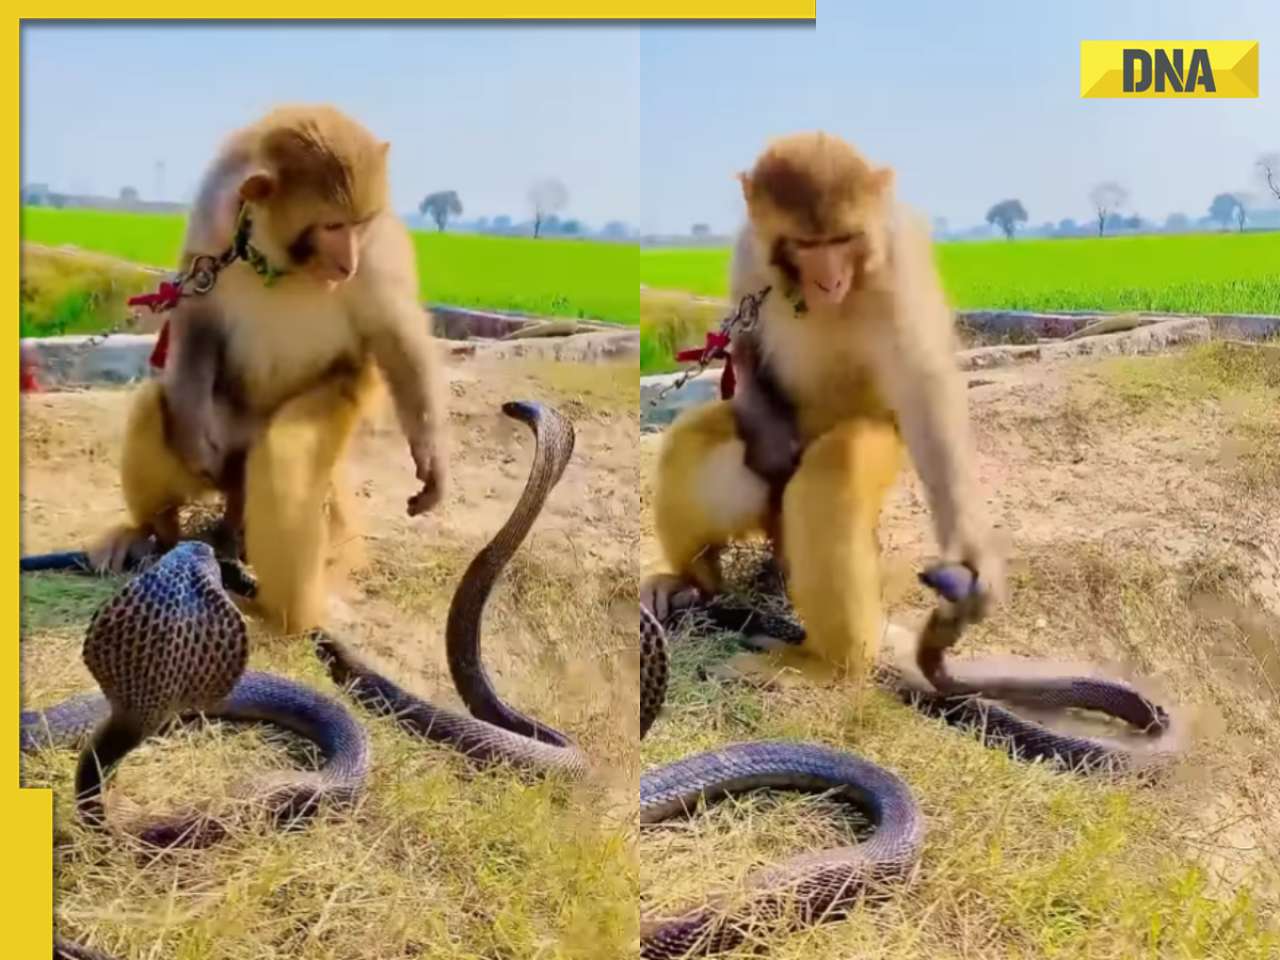 Viral video: Monkey playfully interacts with king cobra, internet is shocked